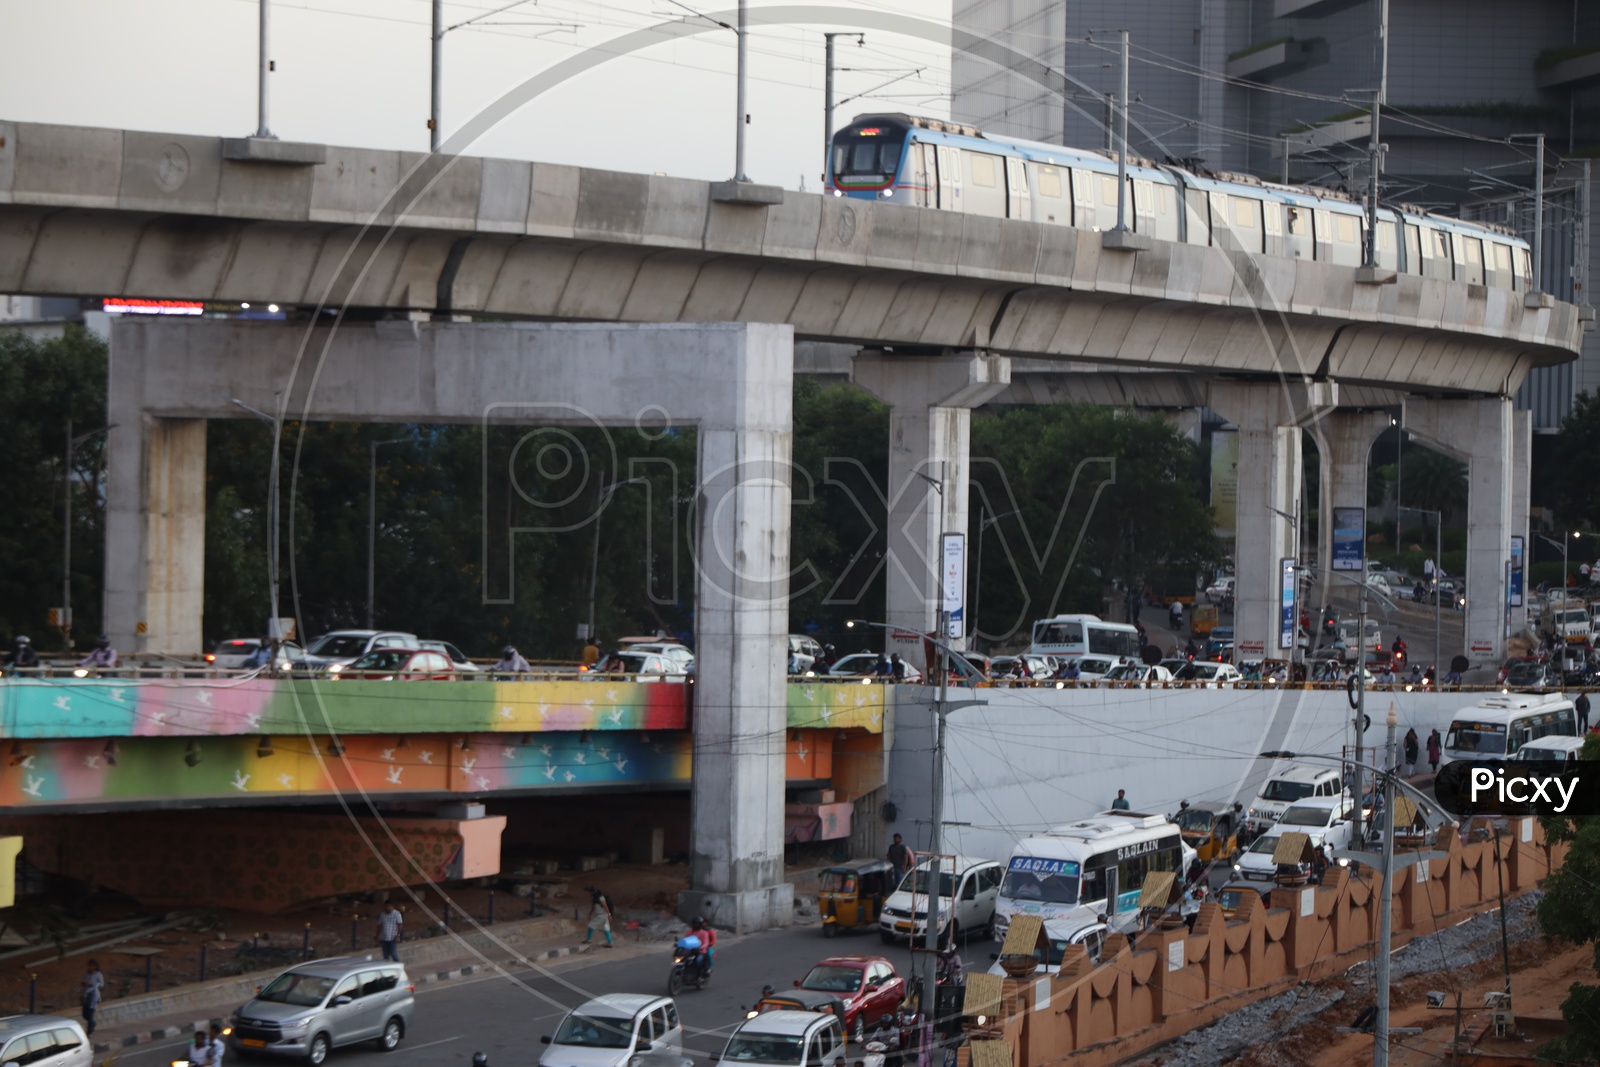 Hyderabad Metro train With Commuting Vehicles On Road And Flyover At Hi-Tech City Signal